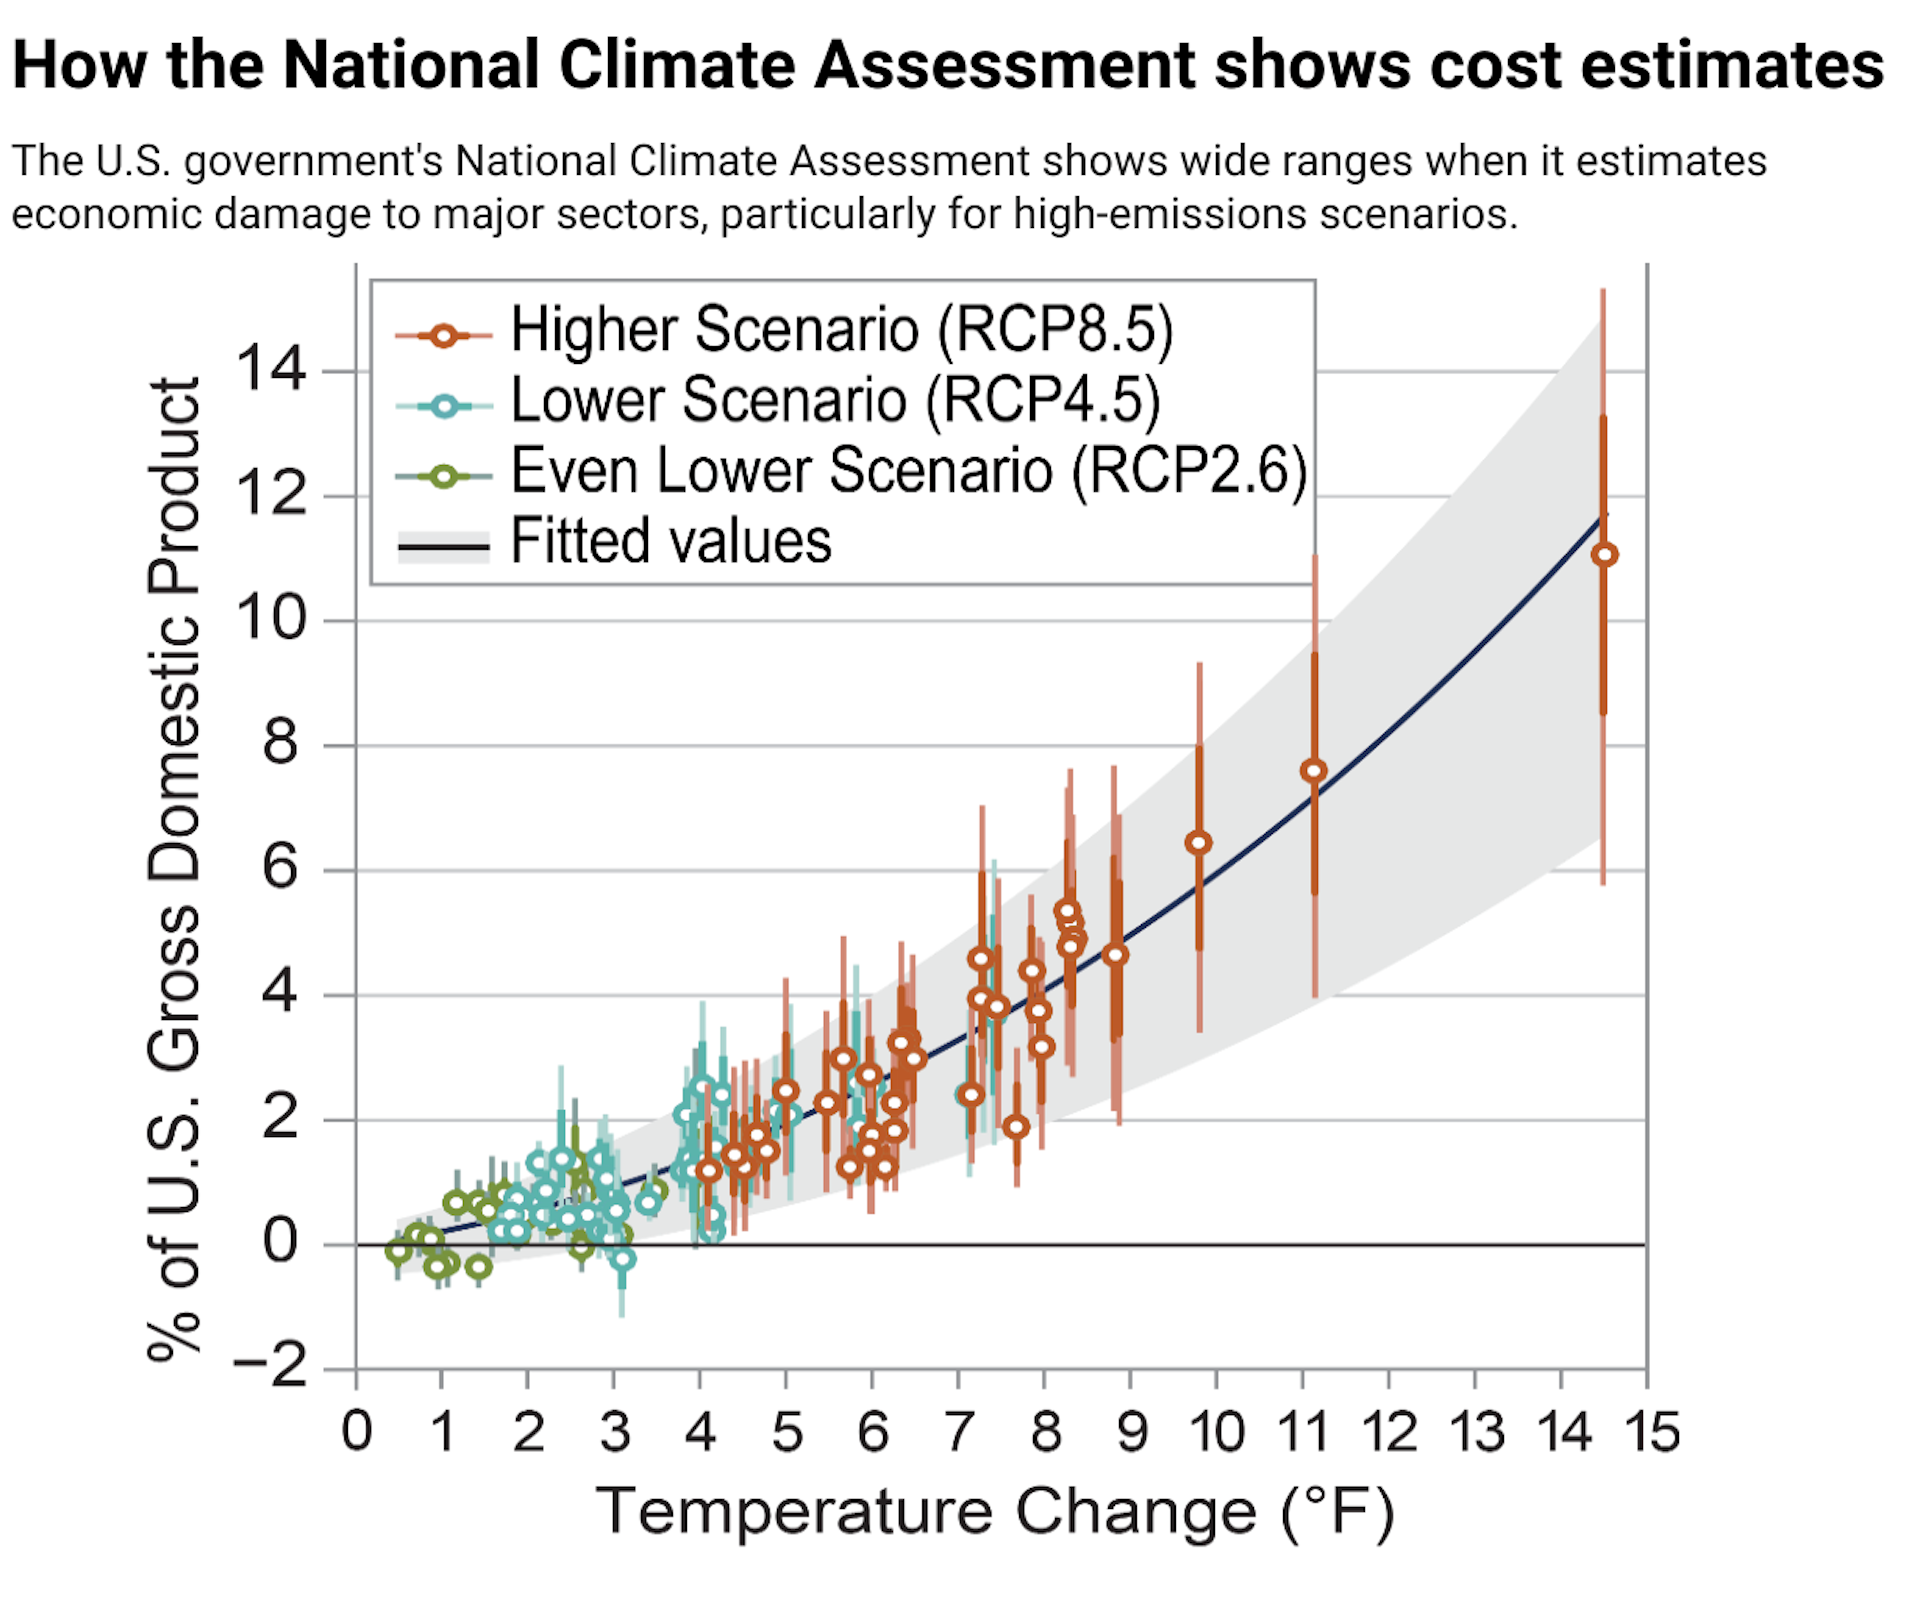 Chart showing cost ranges measured in percentage of GDP for climate change damage to the U.S. economy at each temperature increase, from 1 degree F to 15